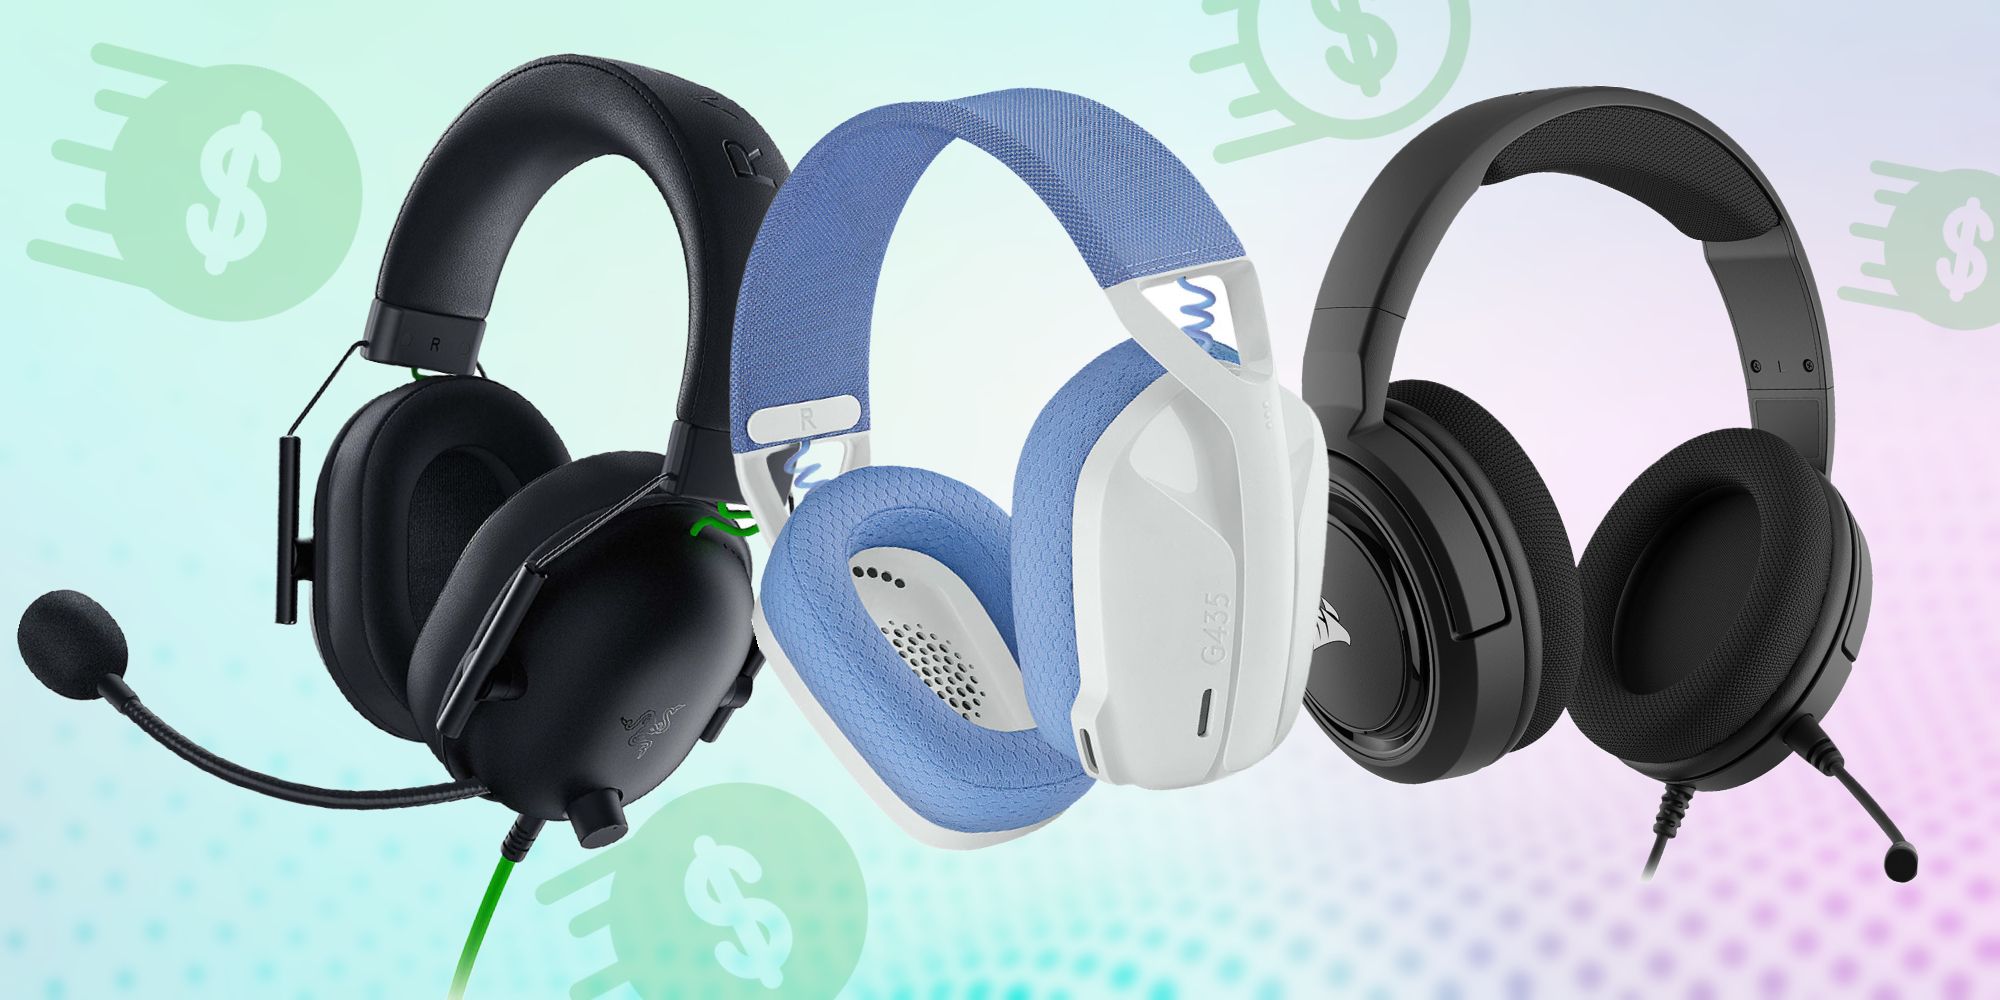 Three gaming headsets, two black and one white, are shown surrounded by money signs.